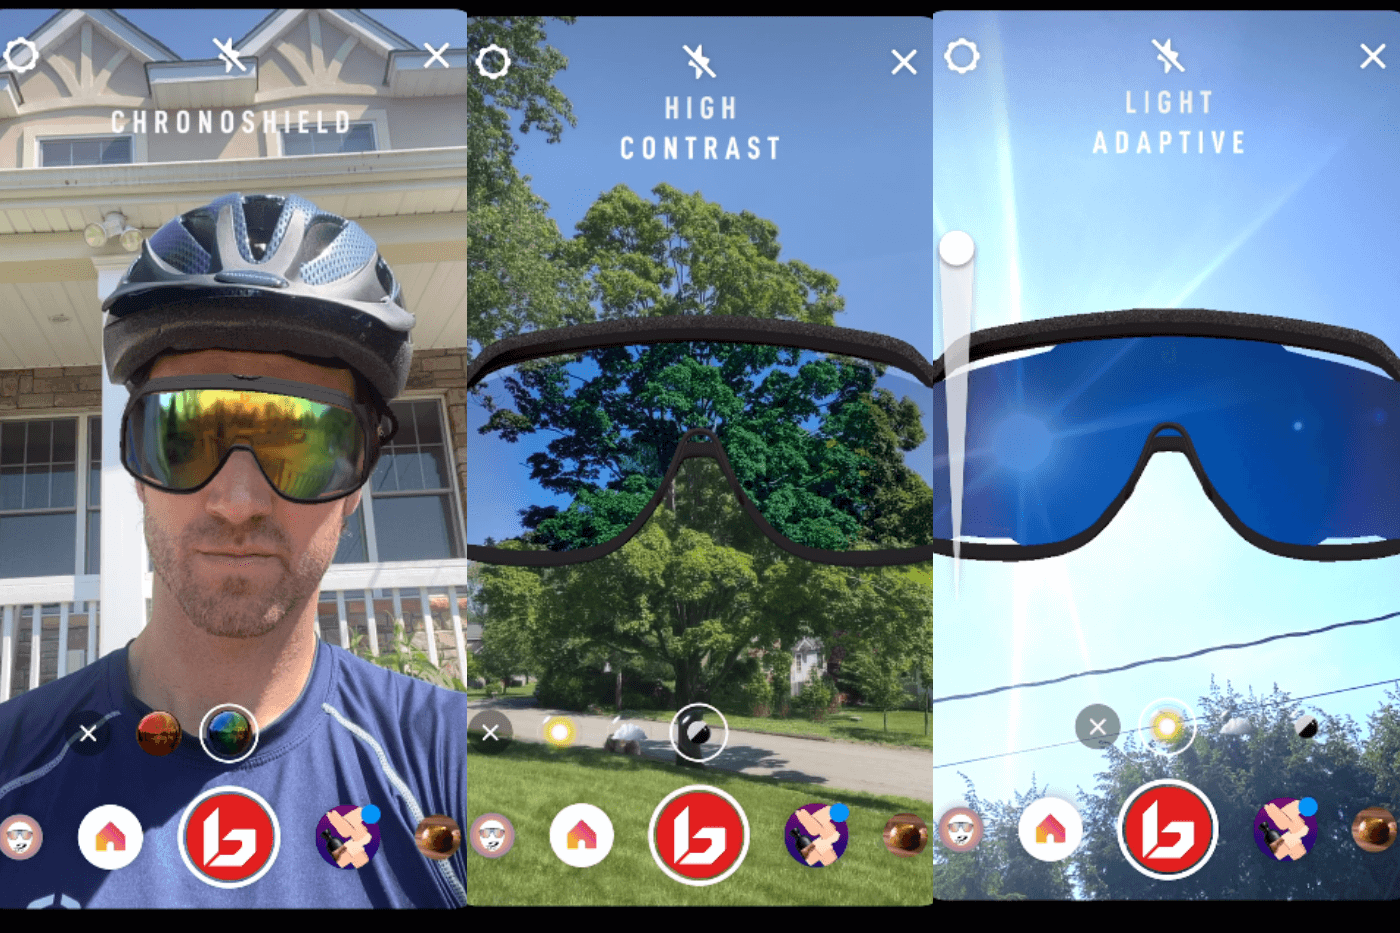 Bollé Launches the First AR Try-Out Experience